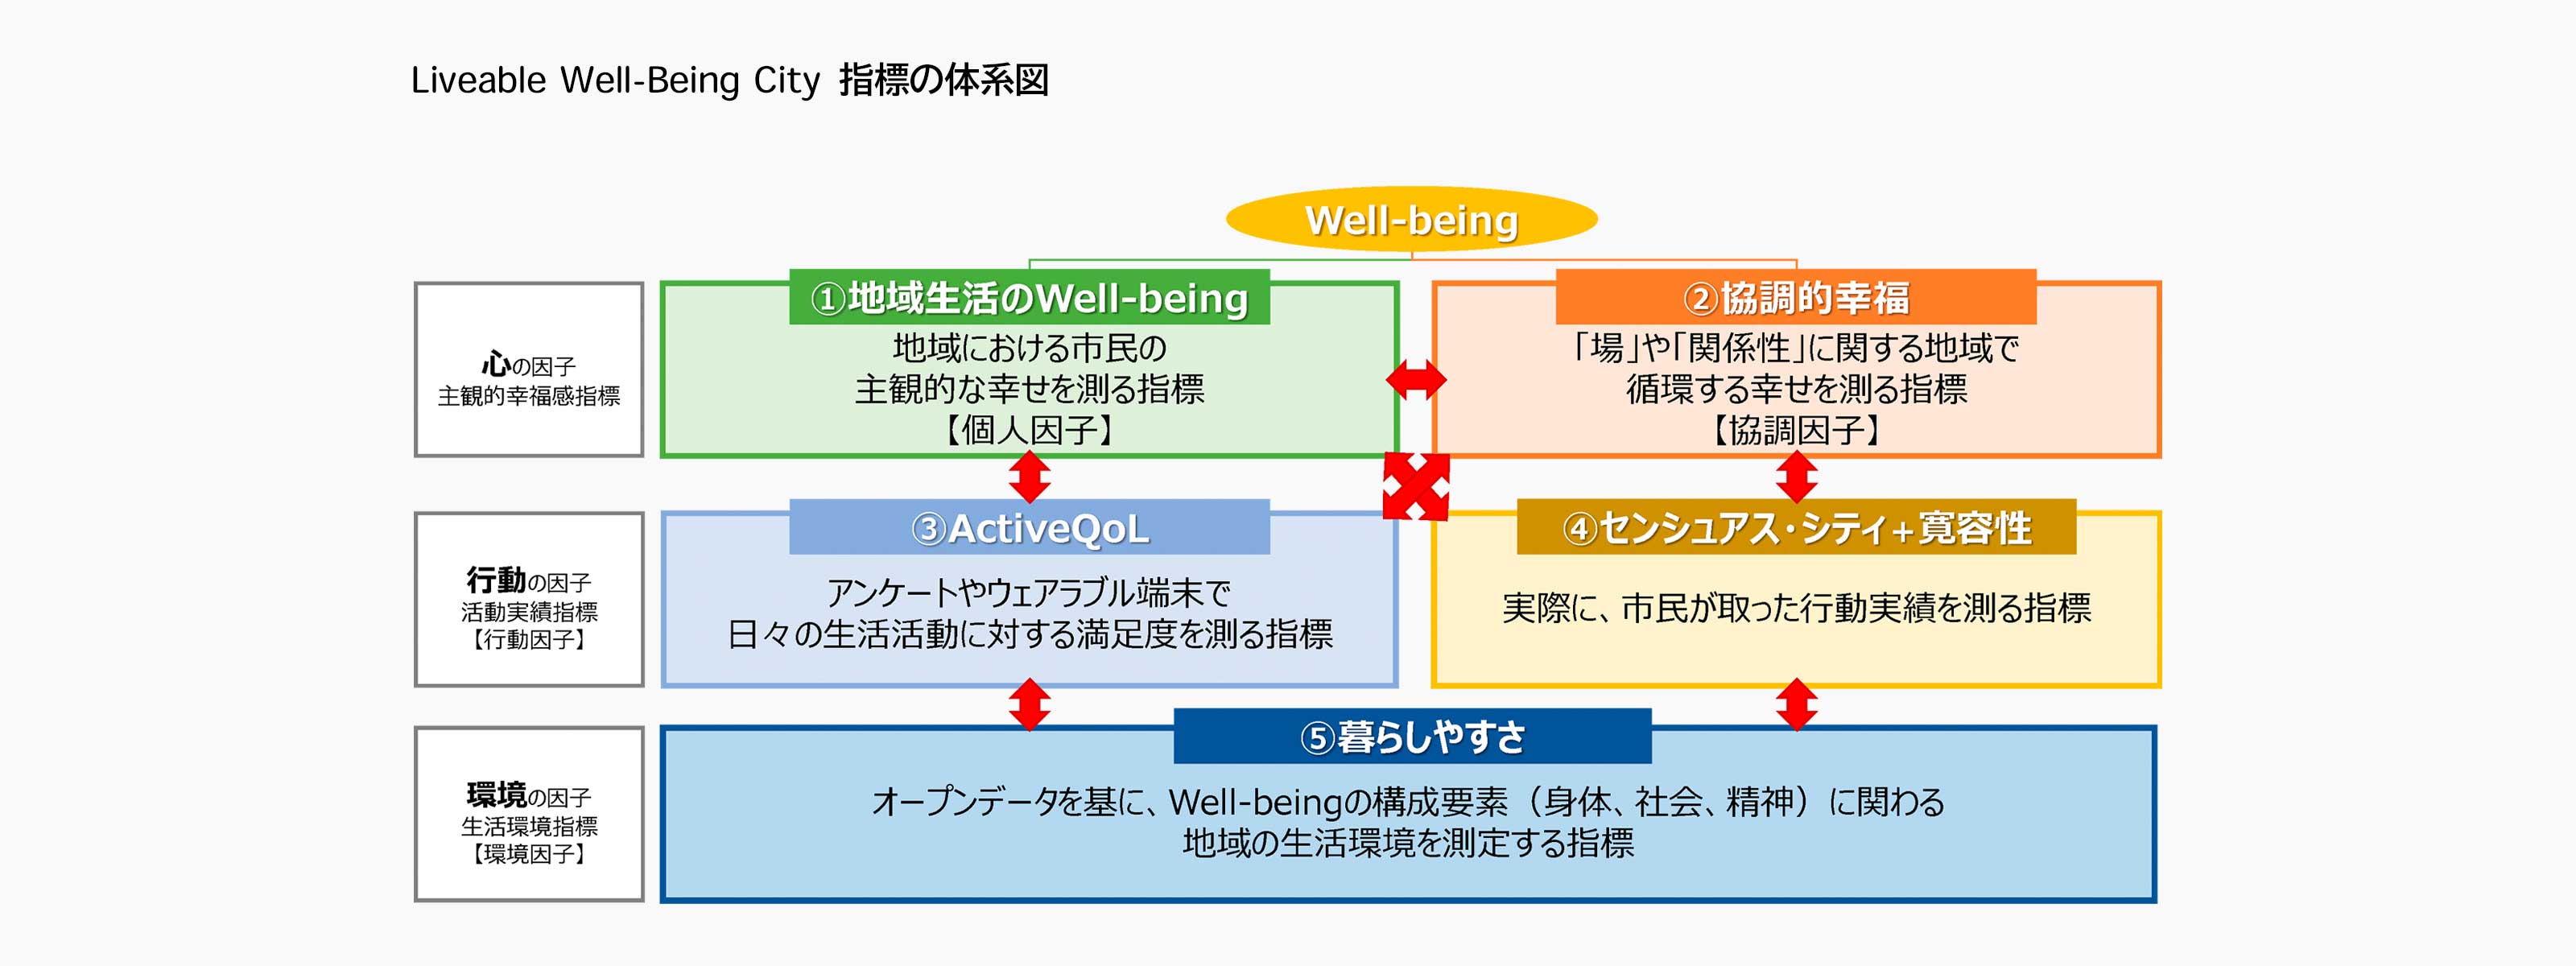 Well-Being公開データ